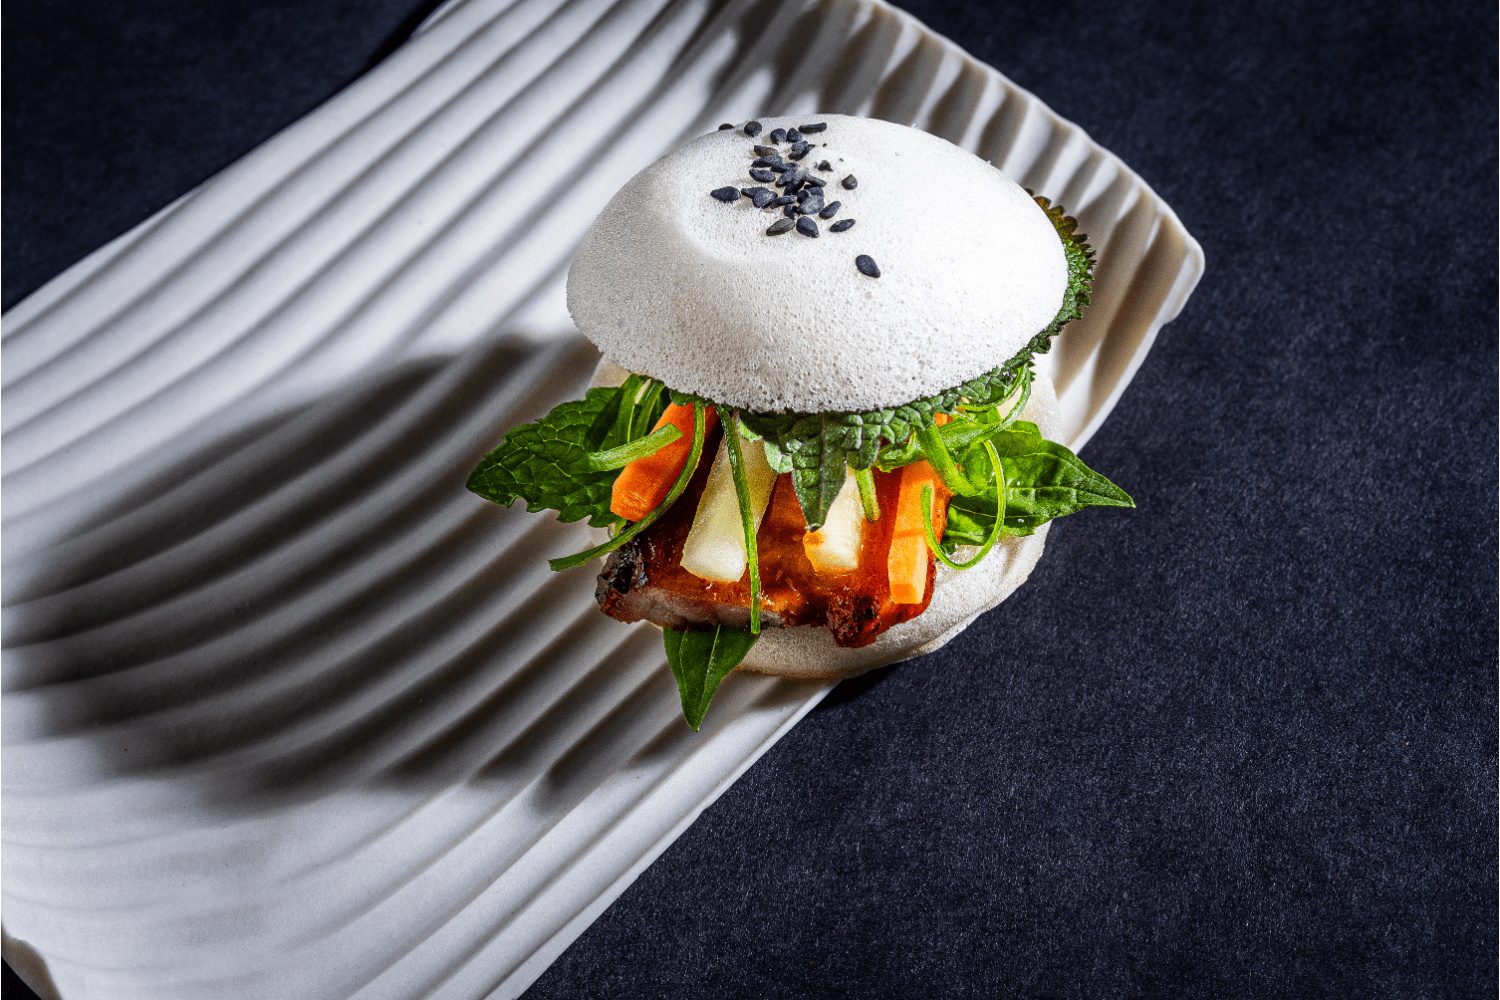 meat and lettuce between two white buns with sesame seeds on a white plate